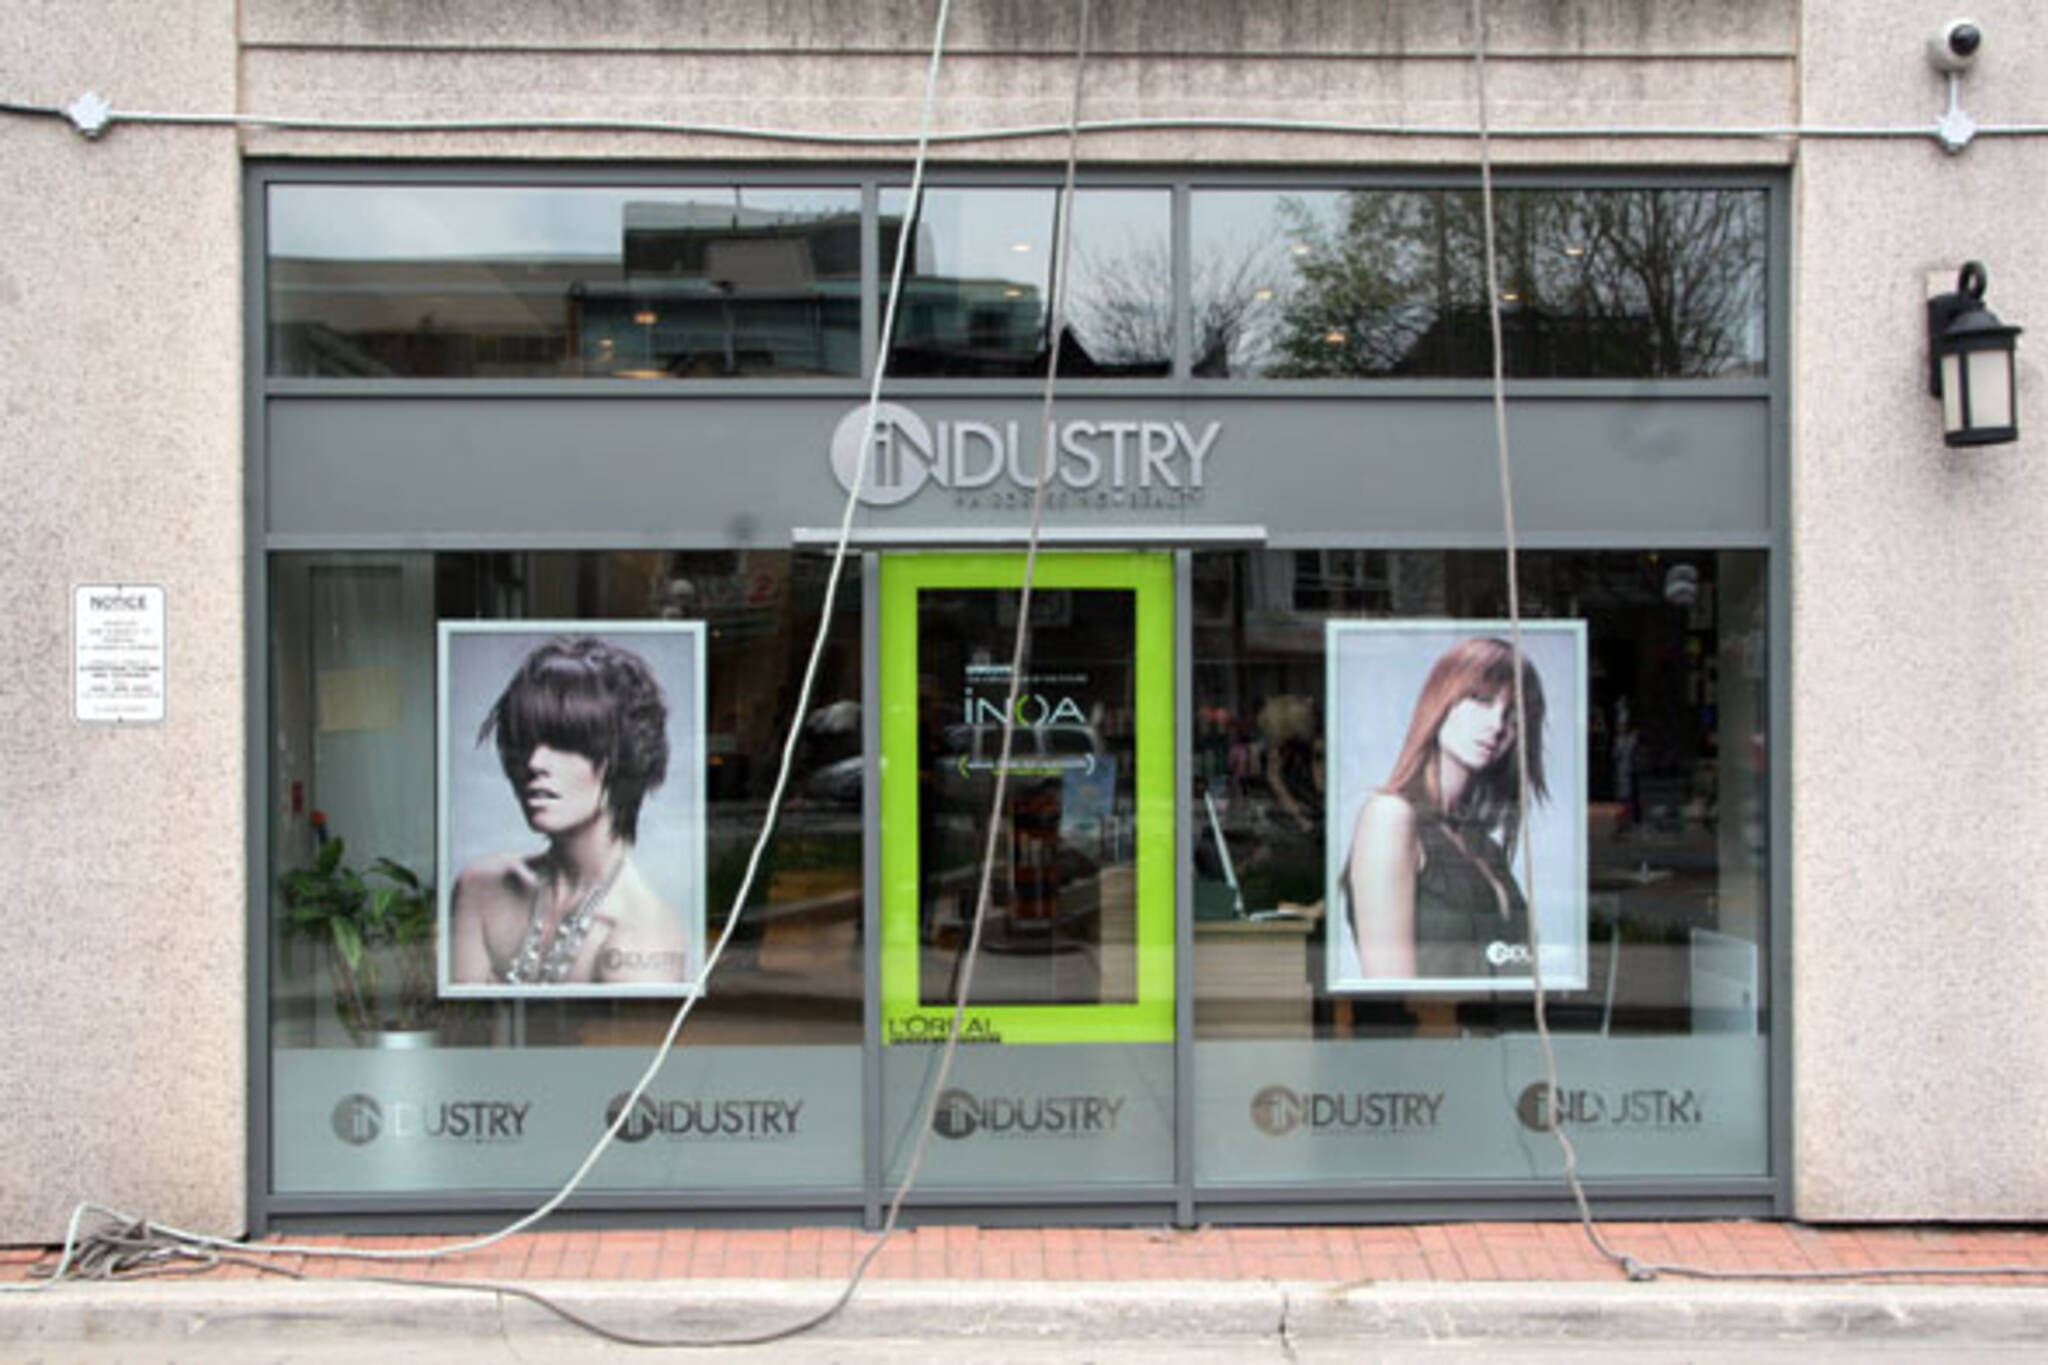 Industry Hairdressing